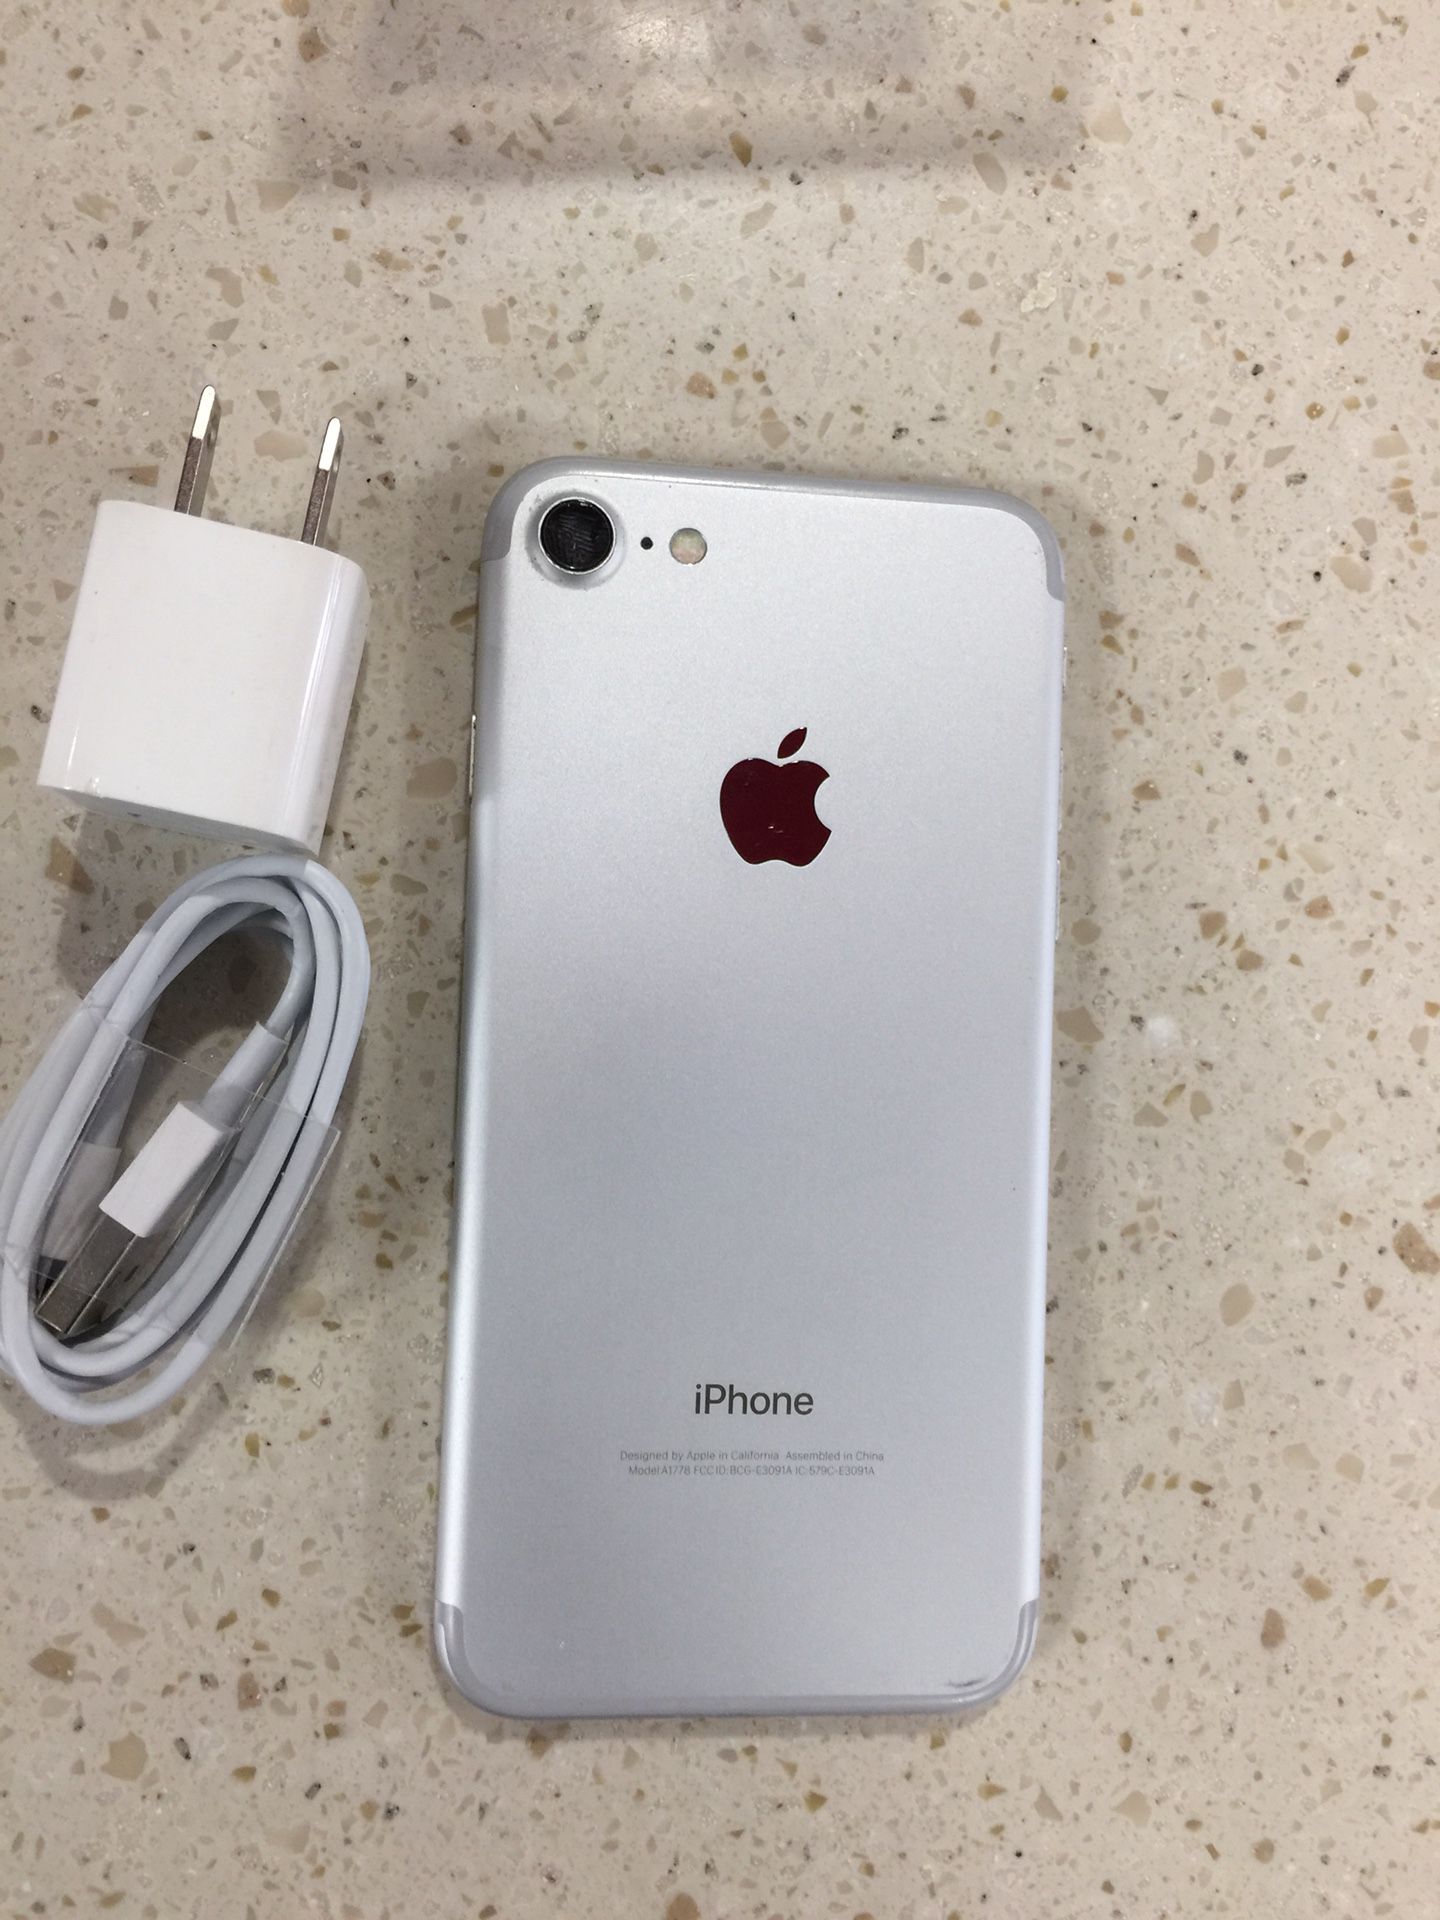 iPhone 7 128g T-Mobile like new